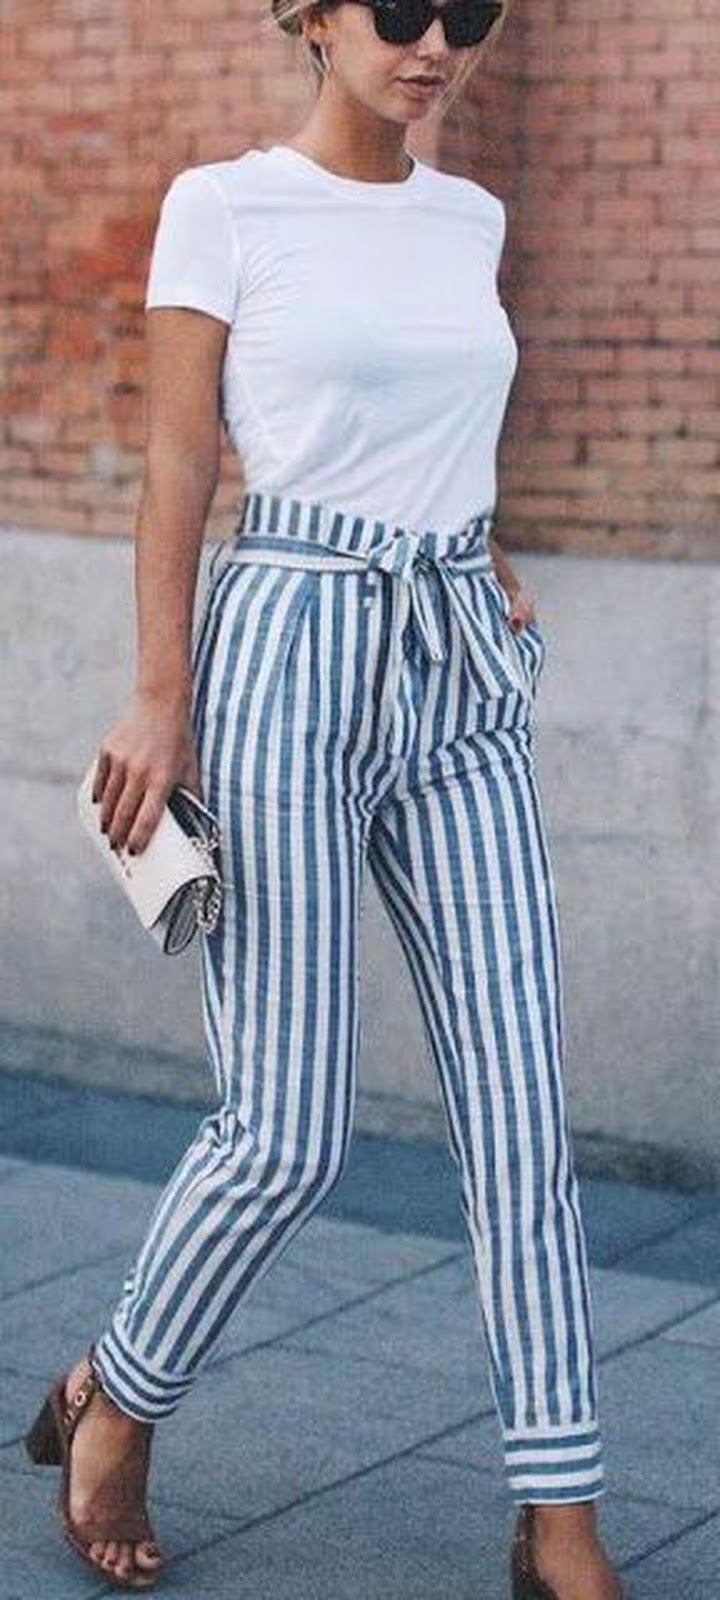 how to style a pair of striped pants : white top + bag + sandals